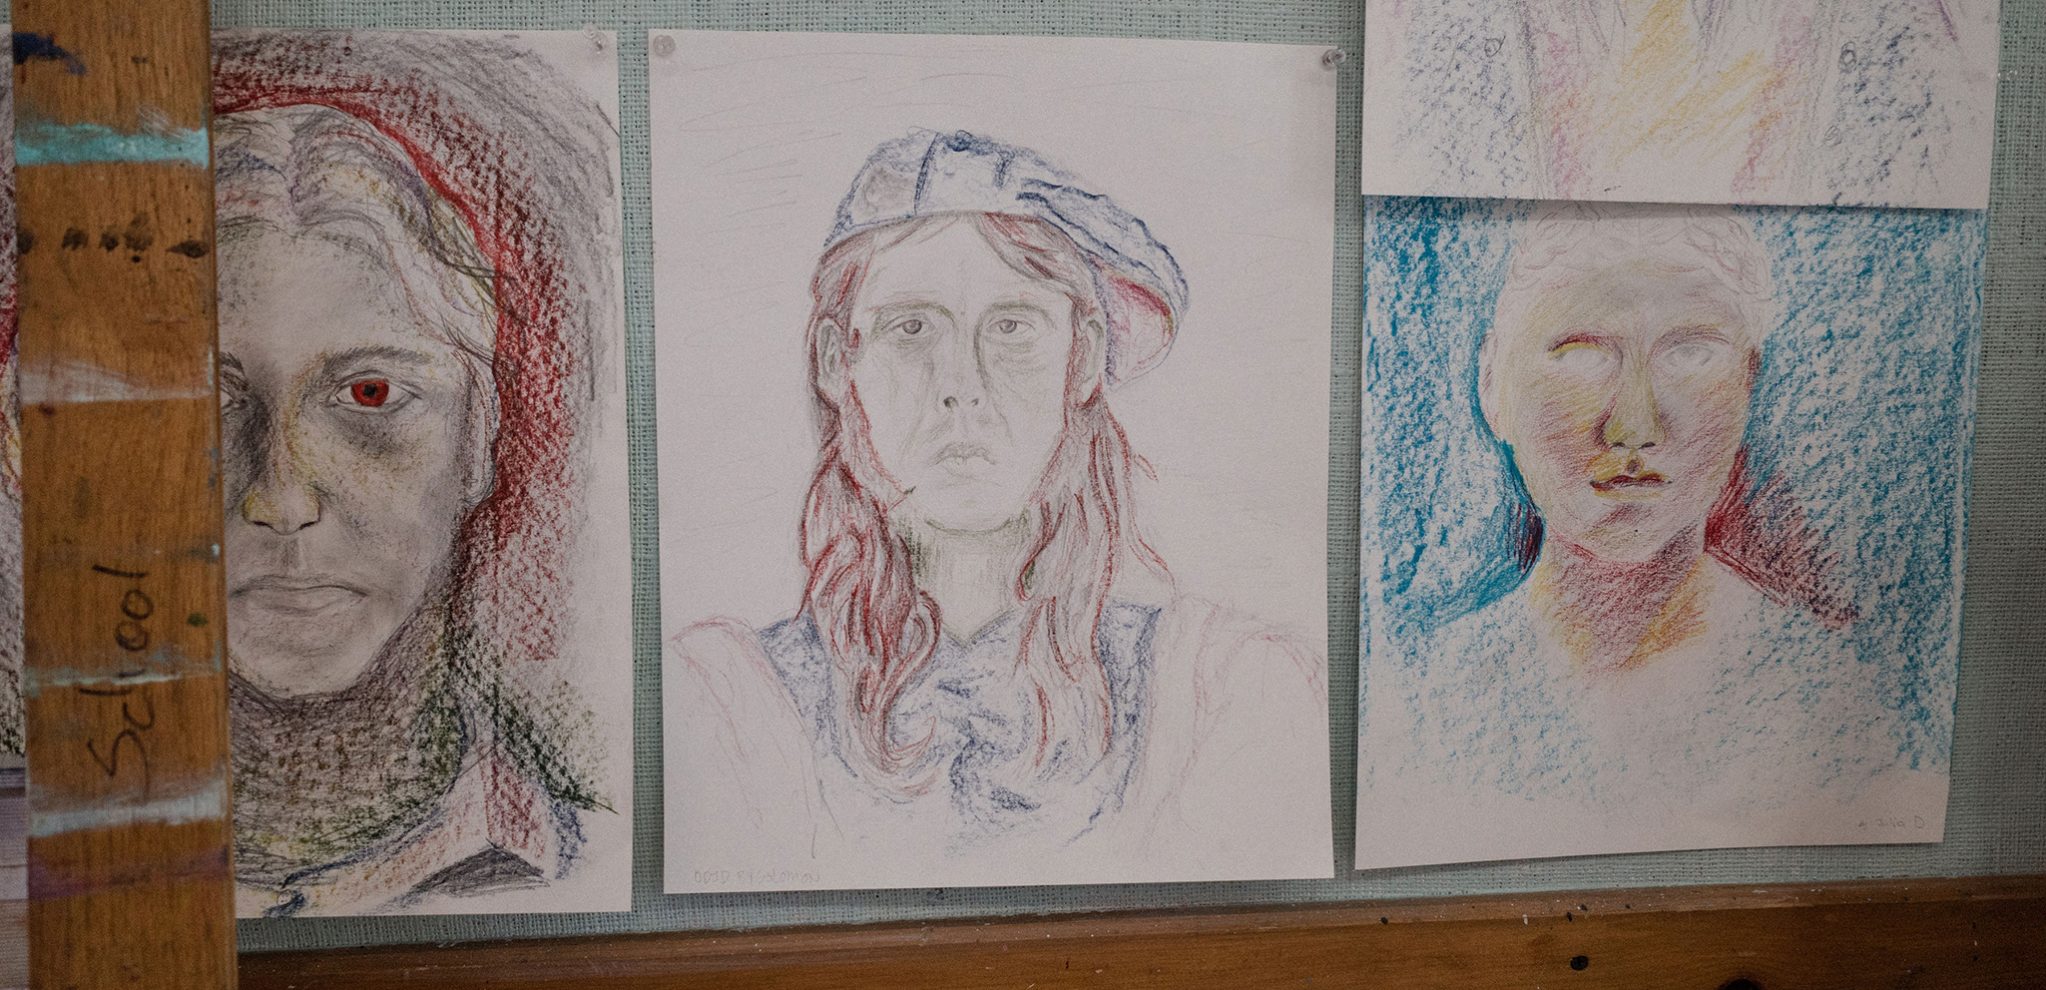 three self-portrait sketches made by seniors hang on a bulletin board